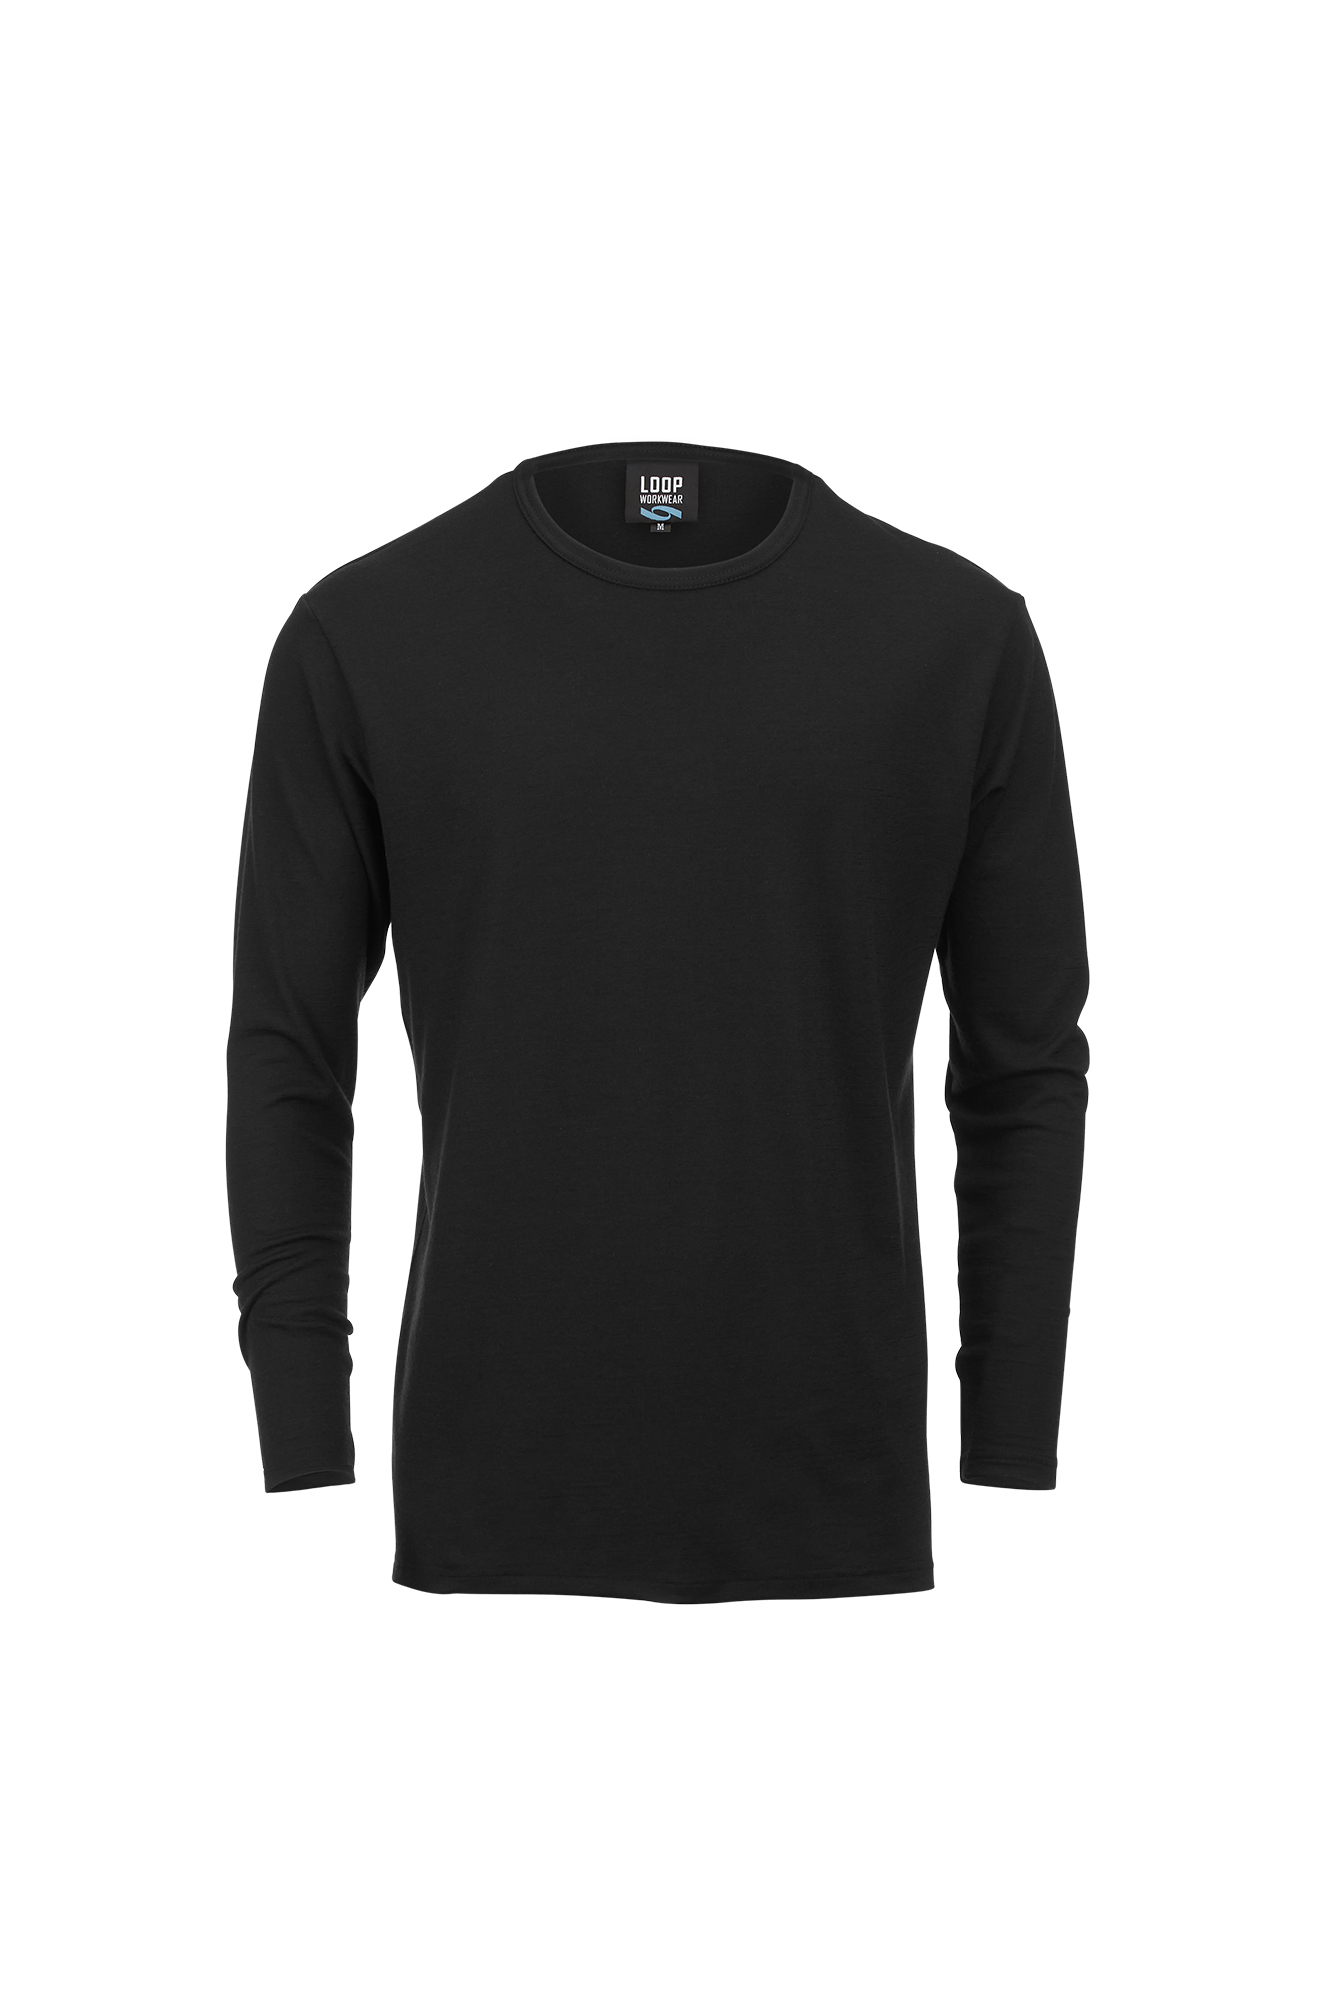 Merino Long Sleeve T Shirt Proudly Made In New Zealand